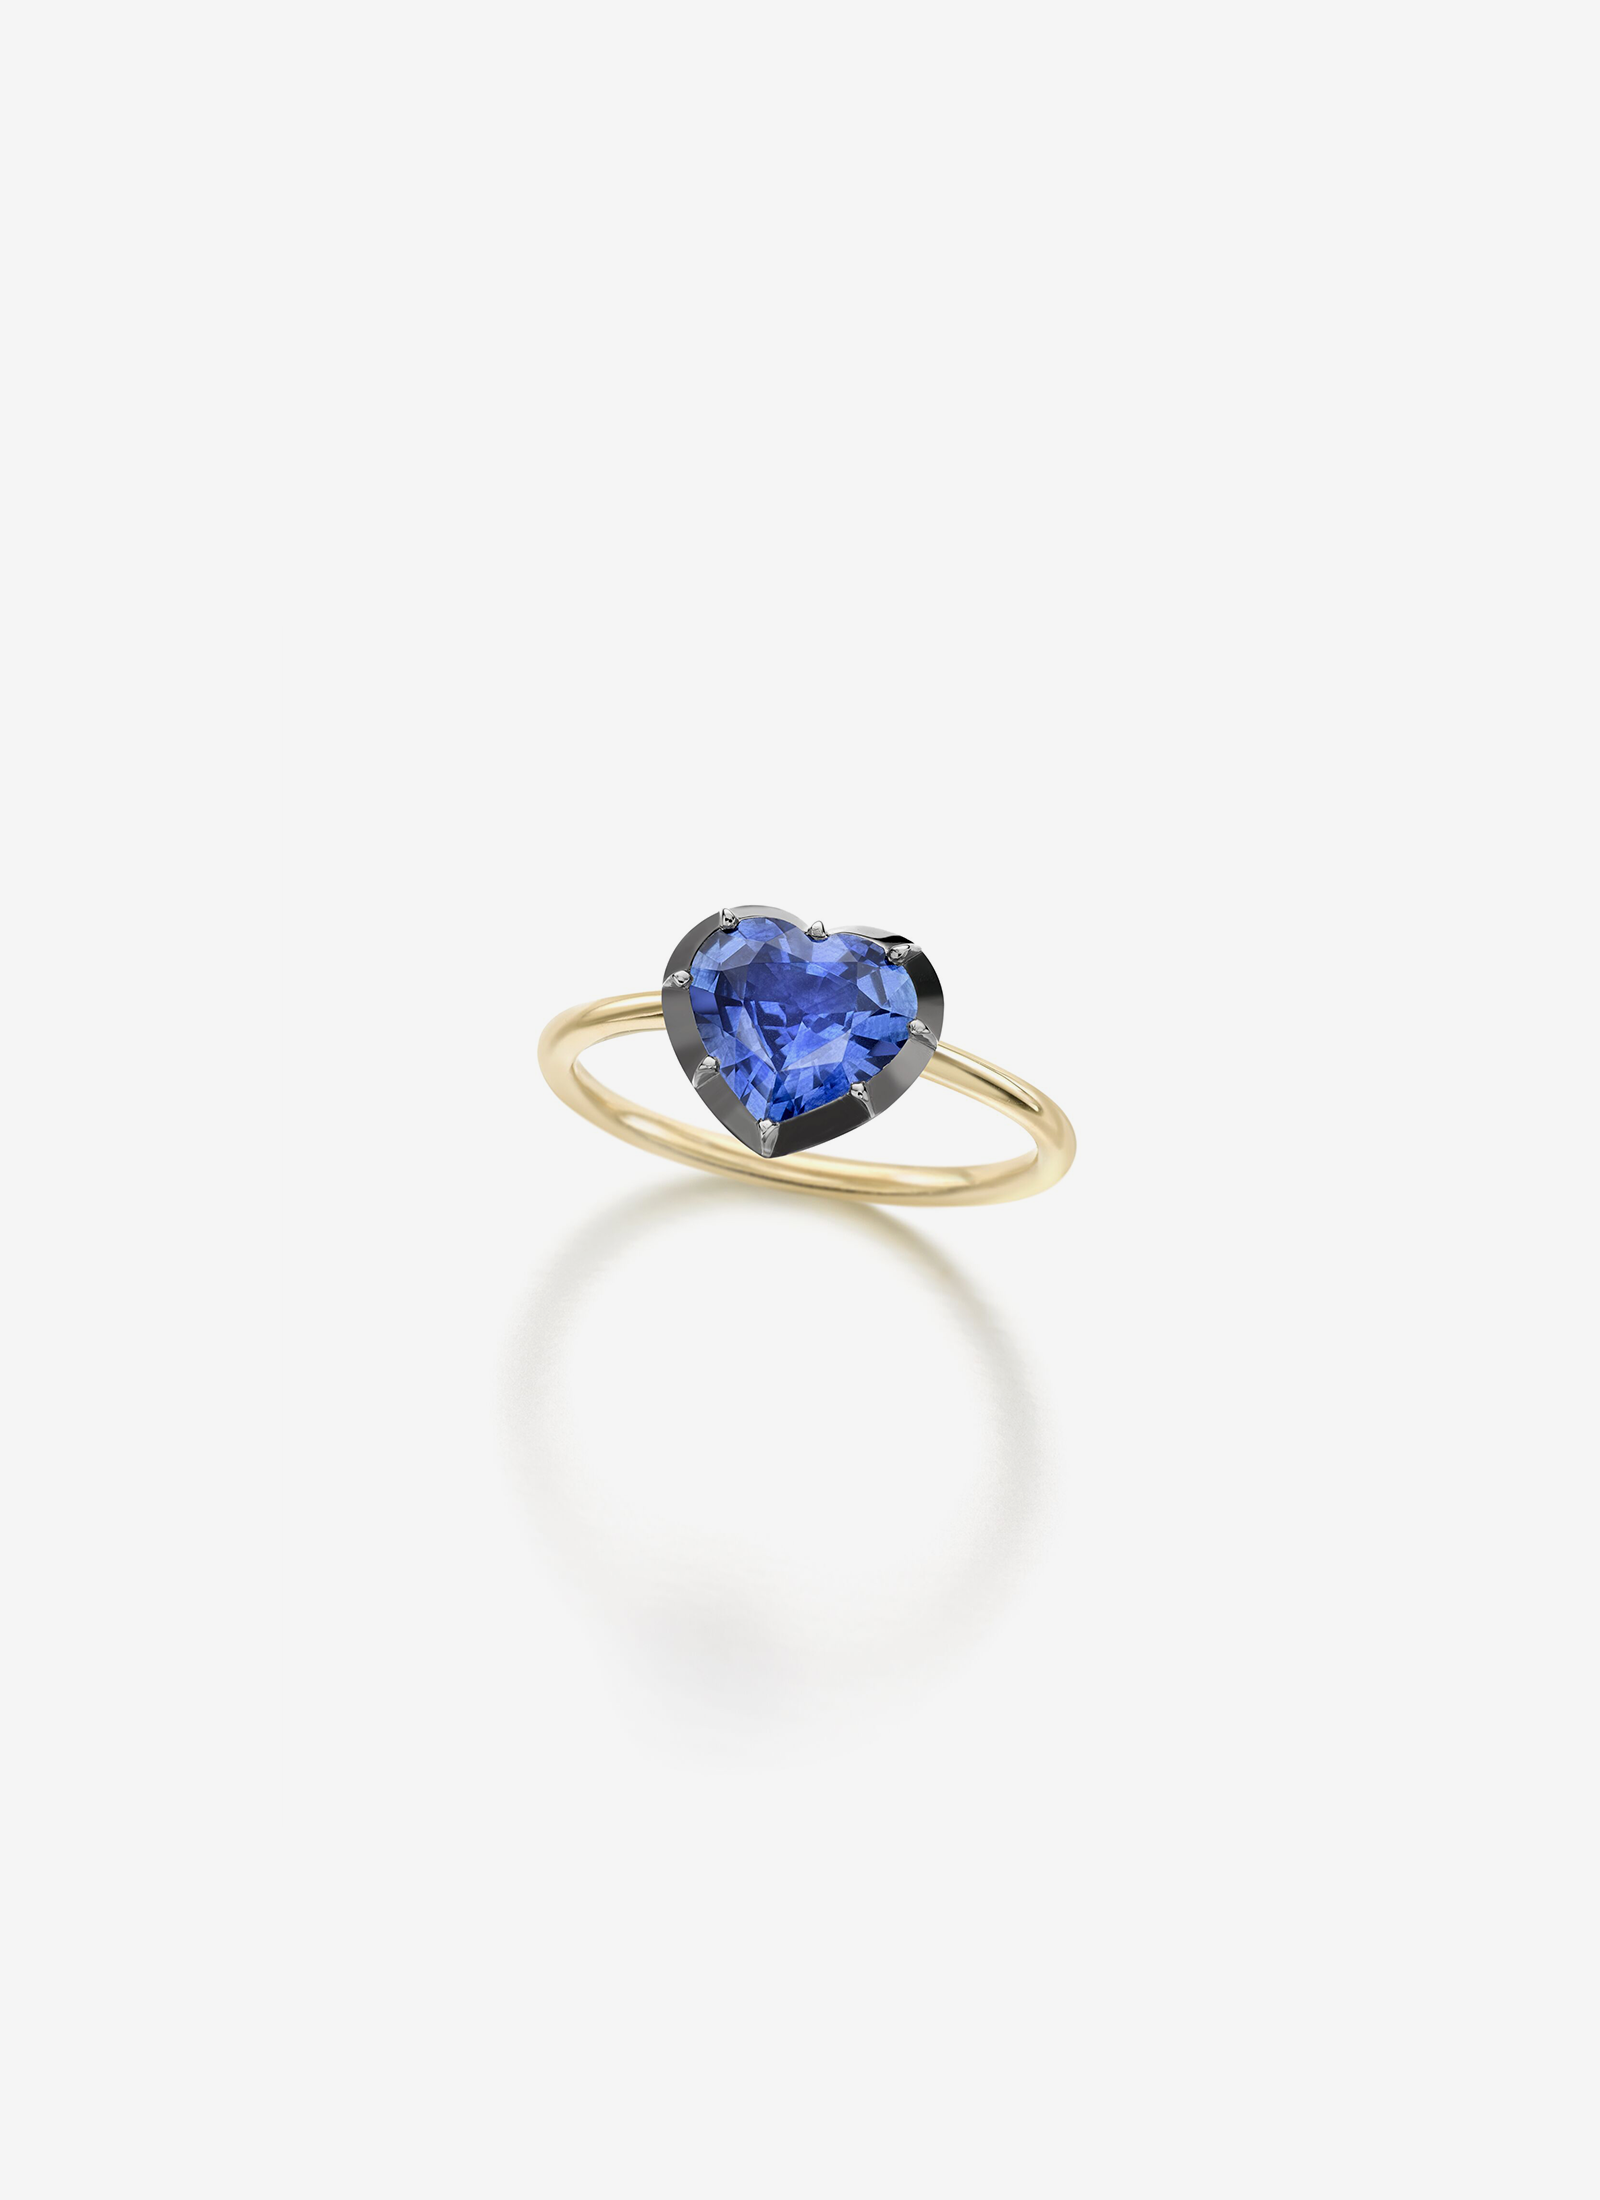 Button Back Sapphire Ring - Heart Shaped 1.75ct